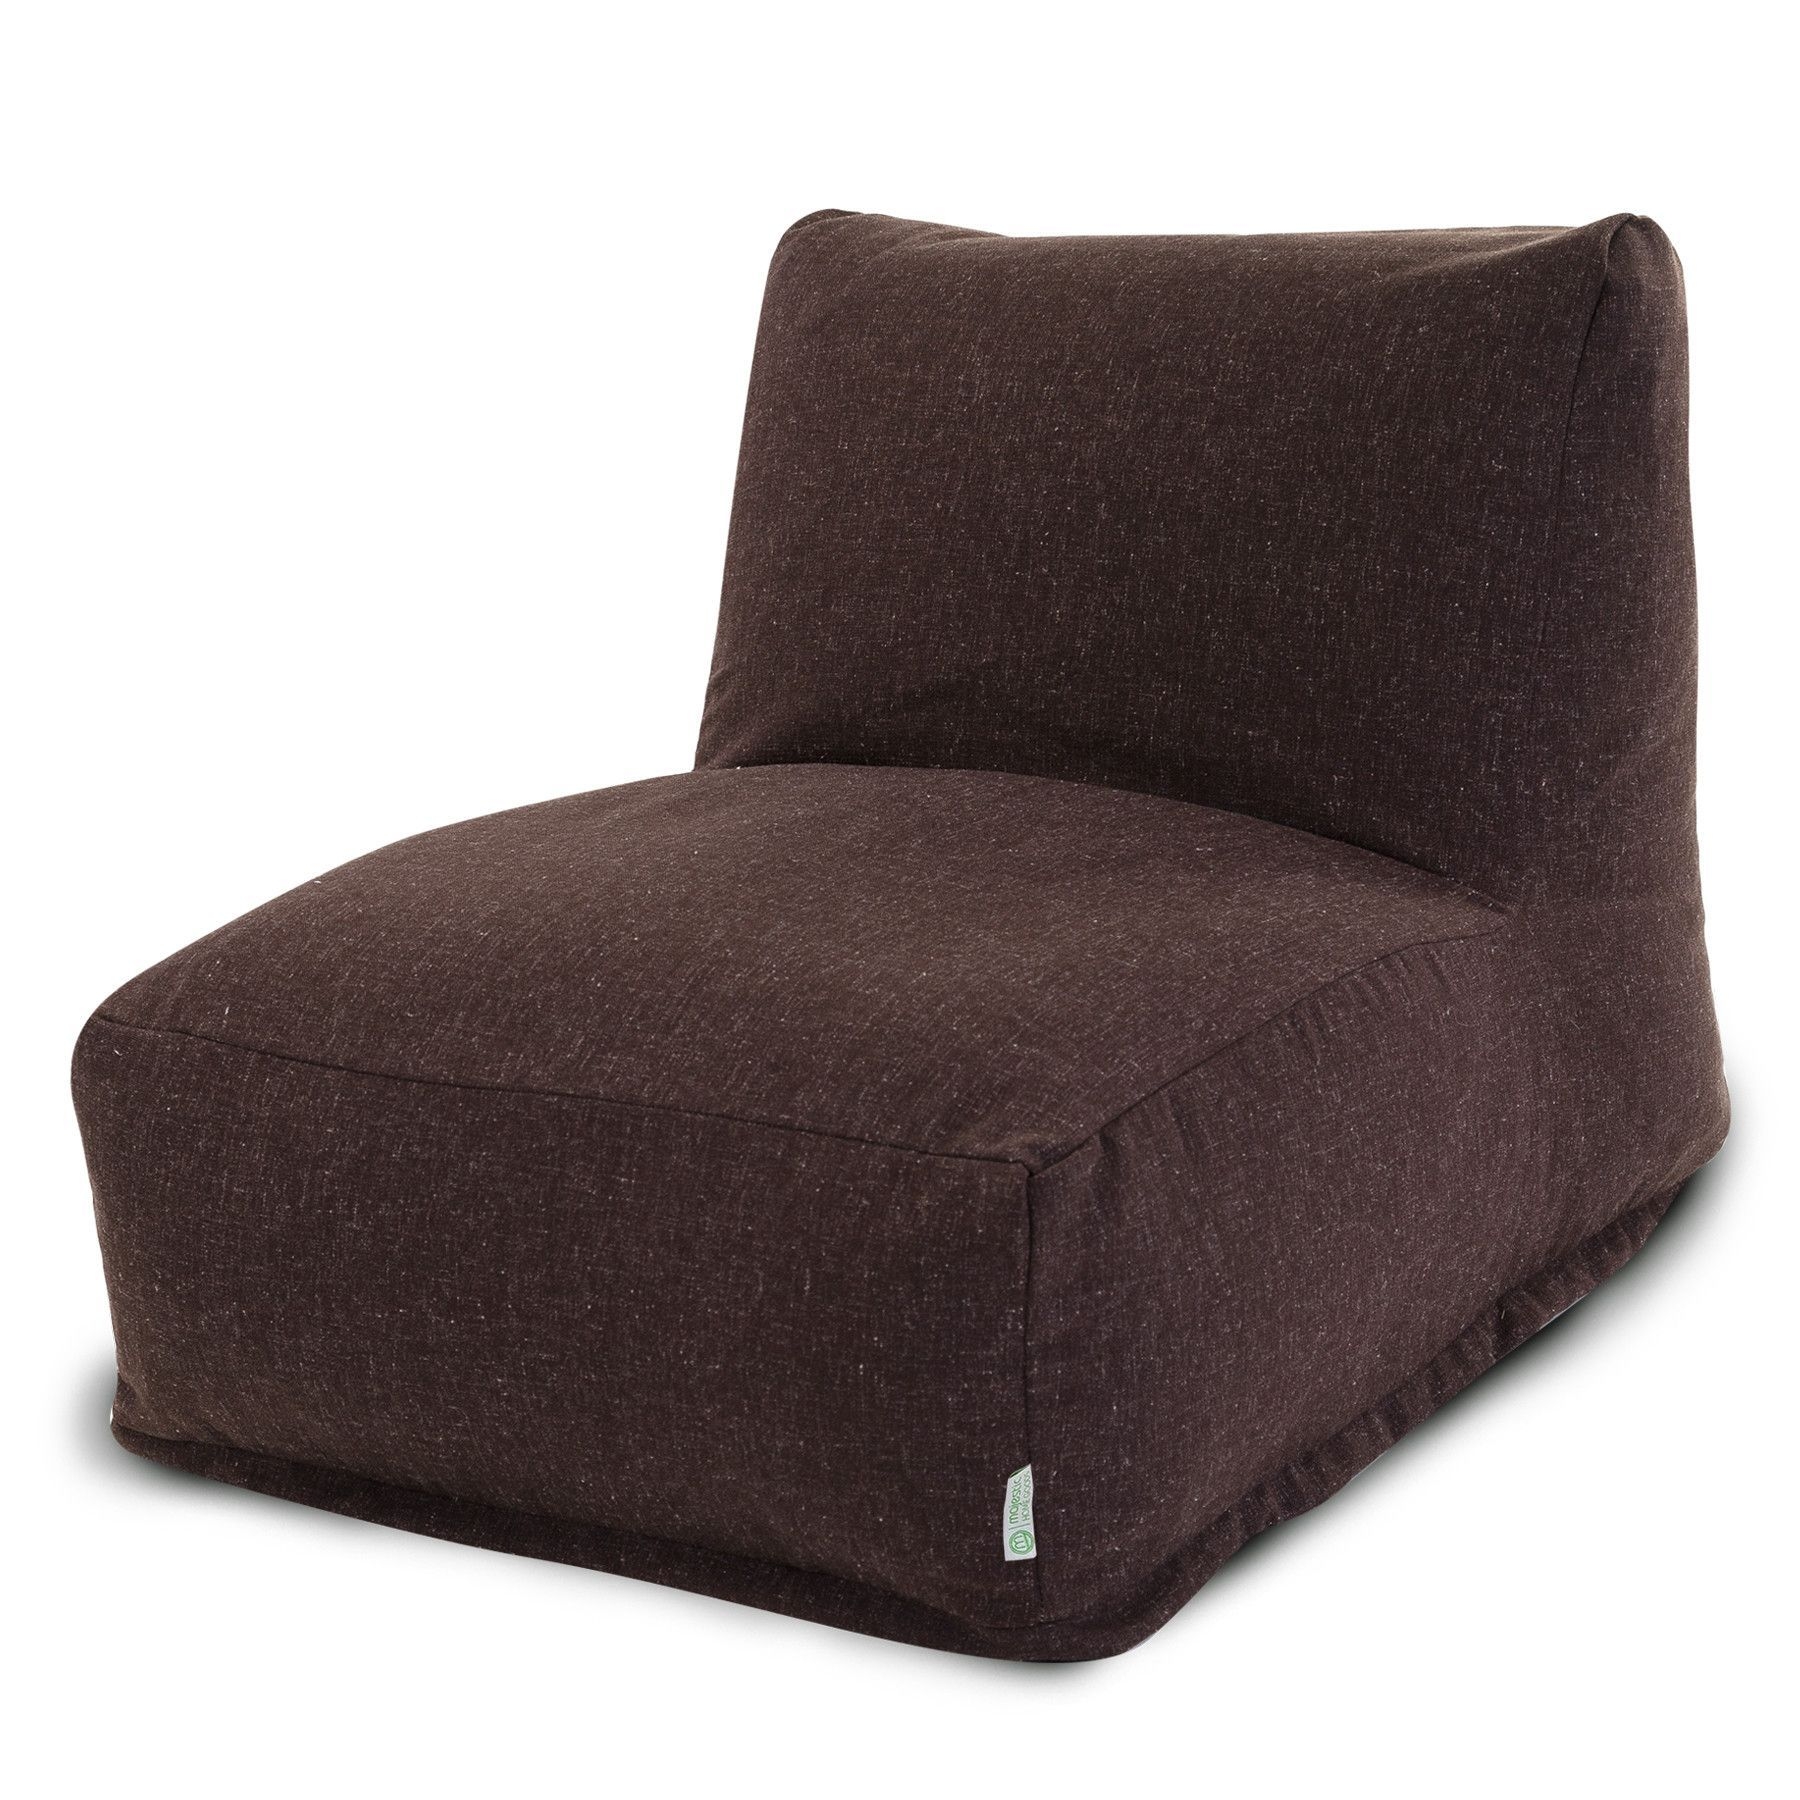 Majestic Home Goods Wales Bean Bag Chair Lounger, Chocolate